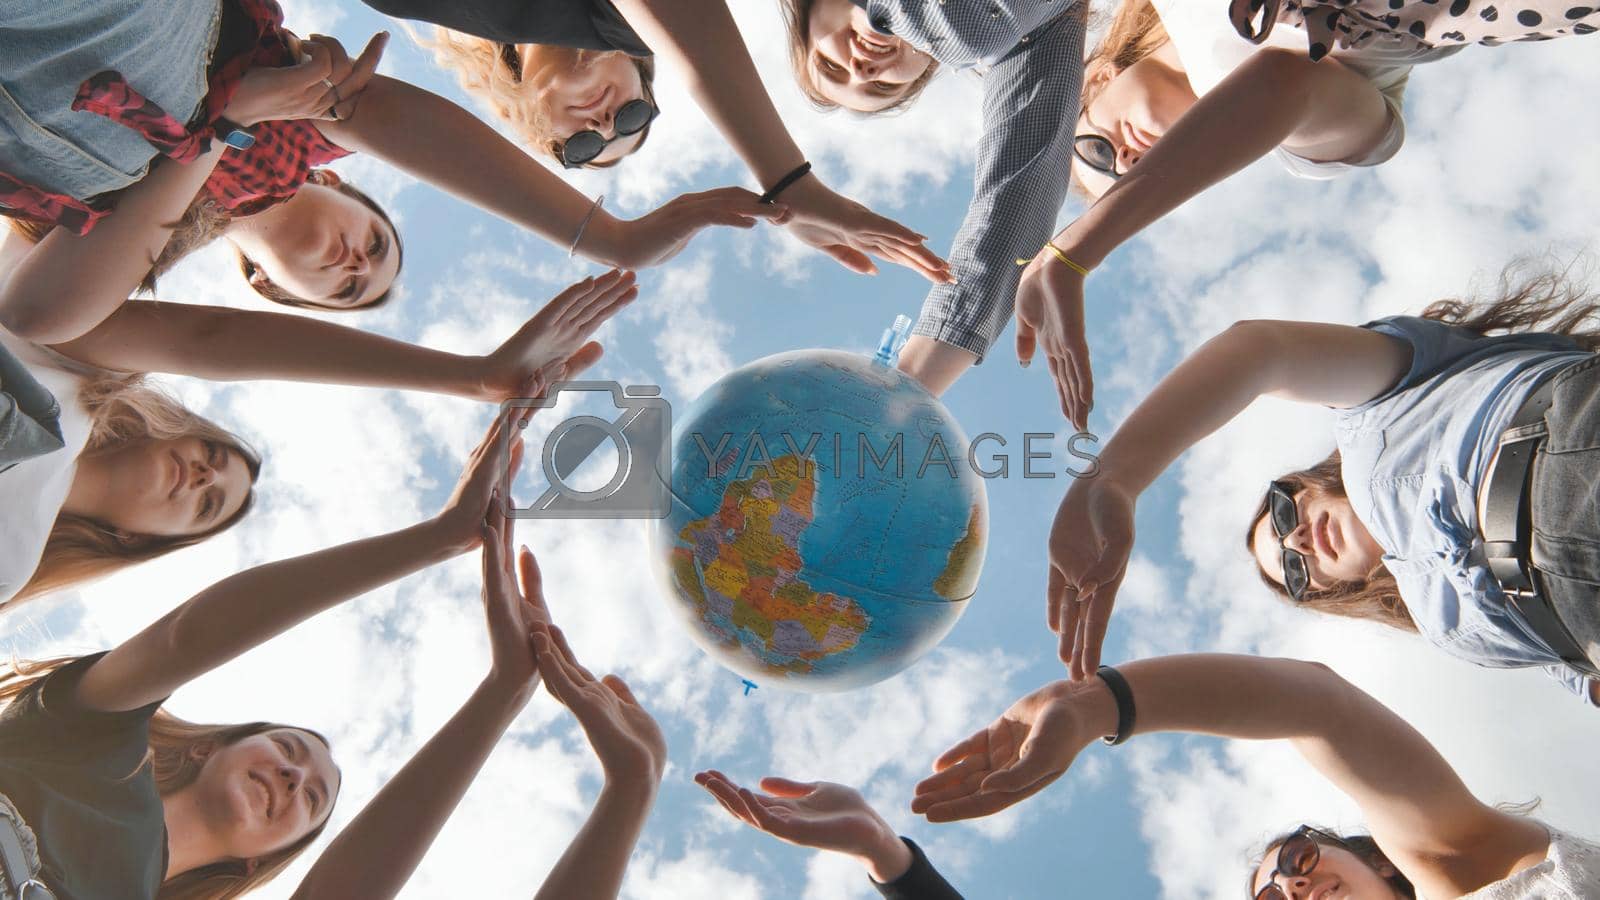 Royalty free image of Earth conservation concept. 11 girls surround the rotating earth globe with their palms hands. by DovidPro